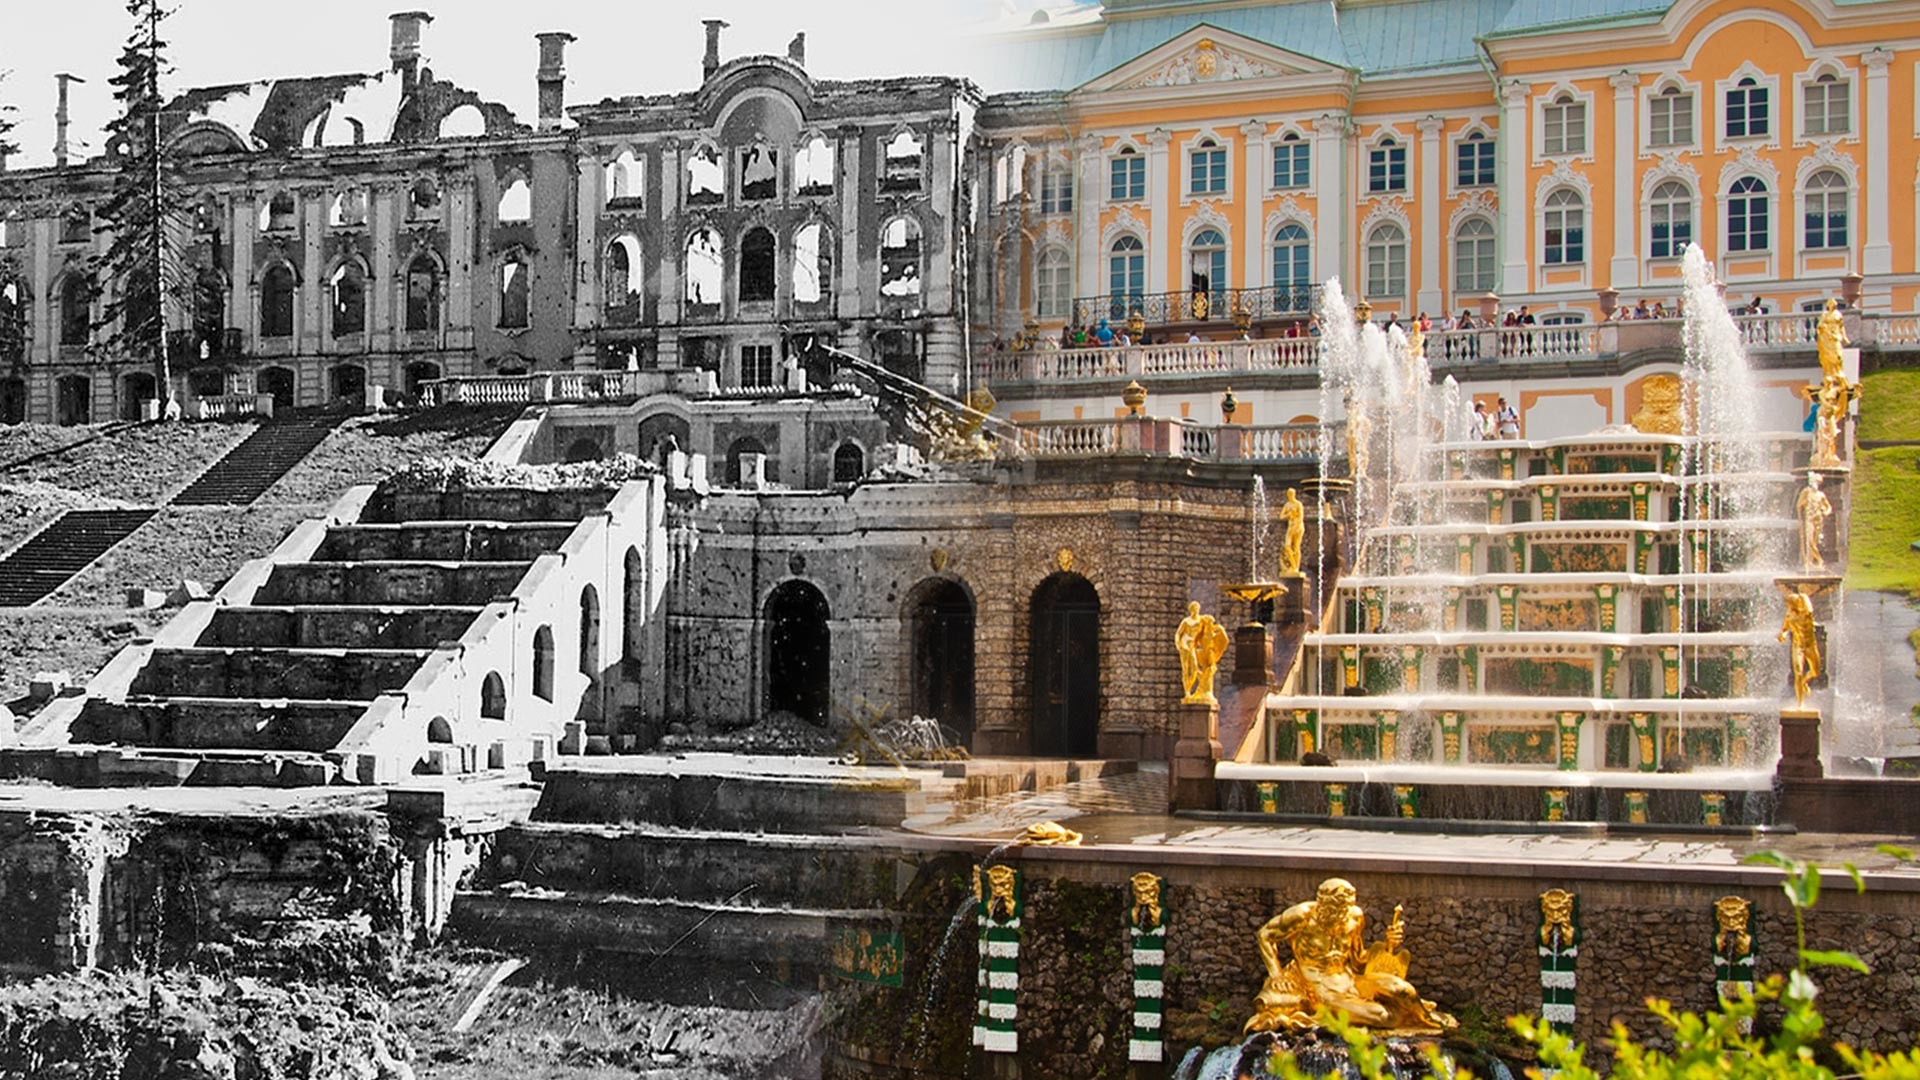 Peterhof in 1944, and now